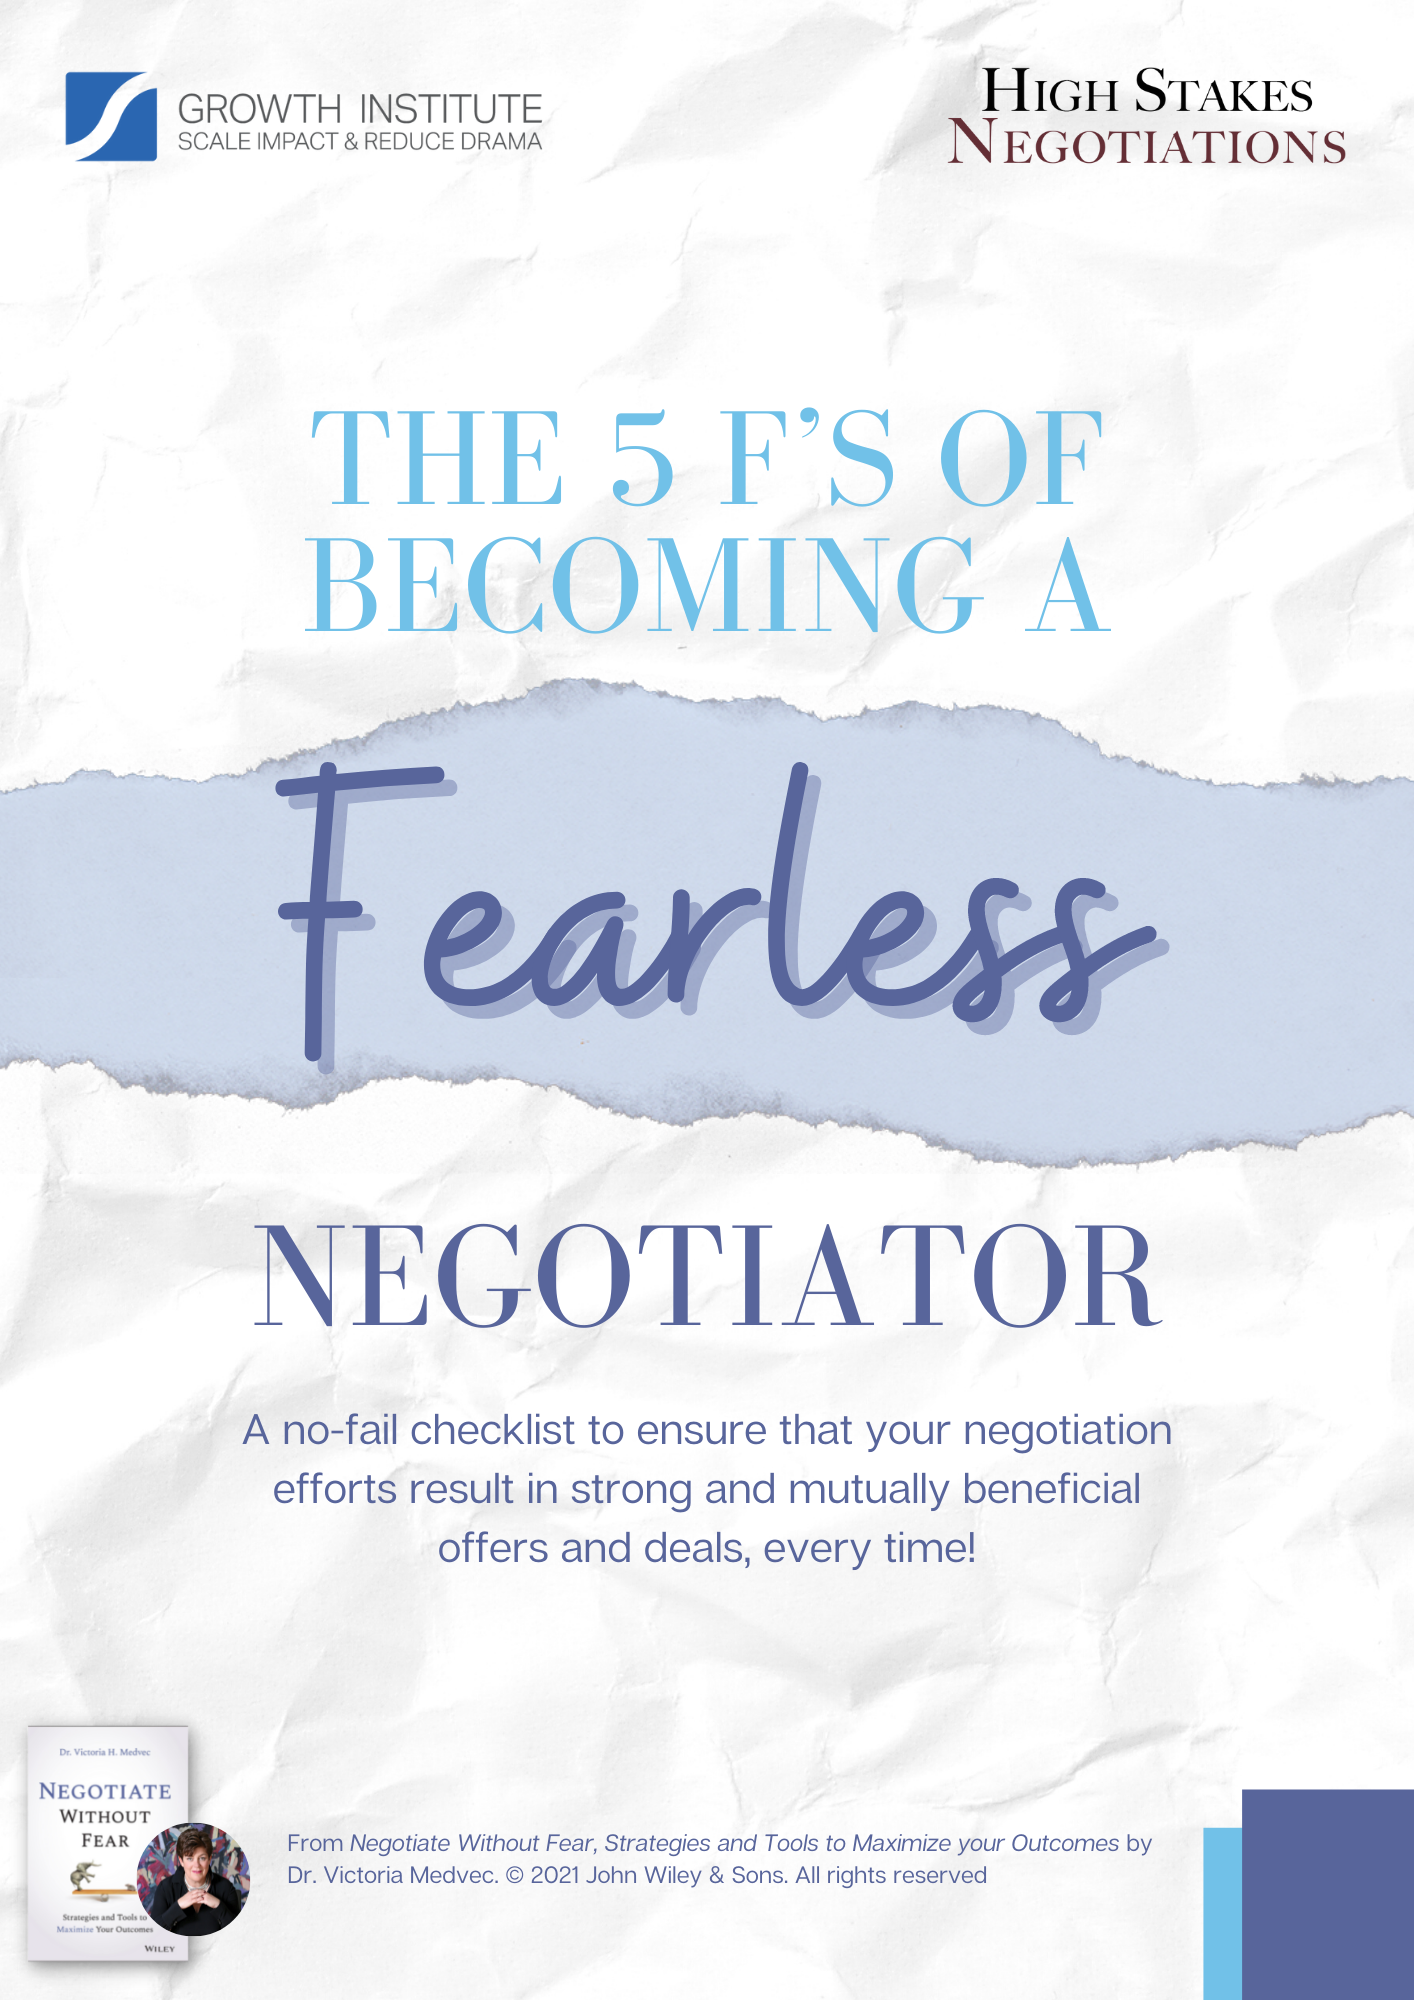 Leadmagnet_The 5 F’s of Becoming a Fearless Negotiator